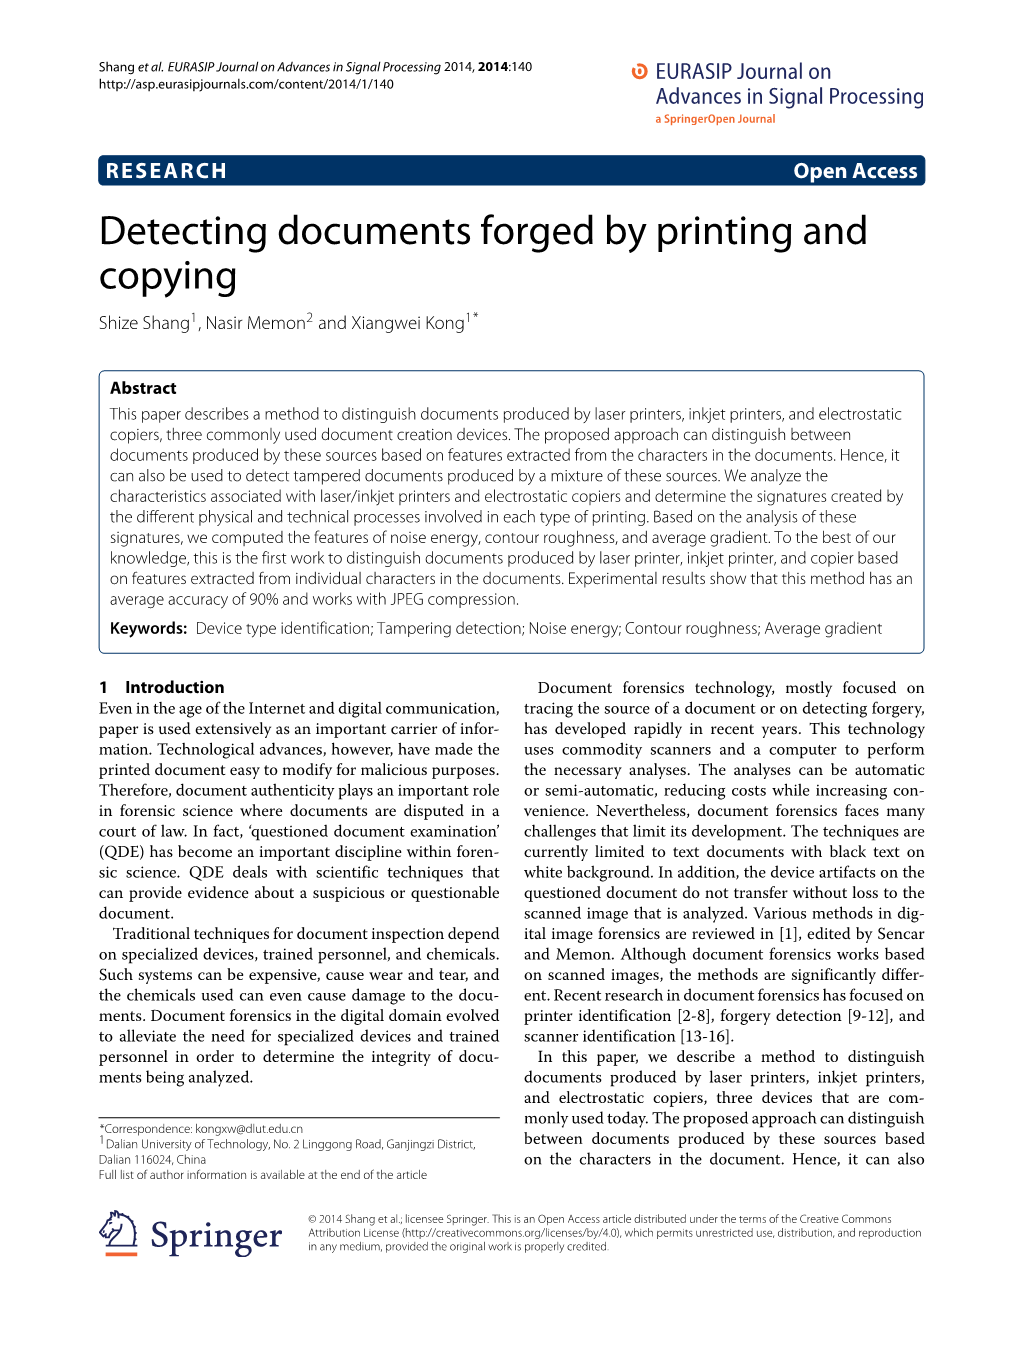 Detecting Documents Forged by Printing and Copying Shize Shang1, Nasir Memon2 and Xiangwei Kong1*